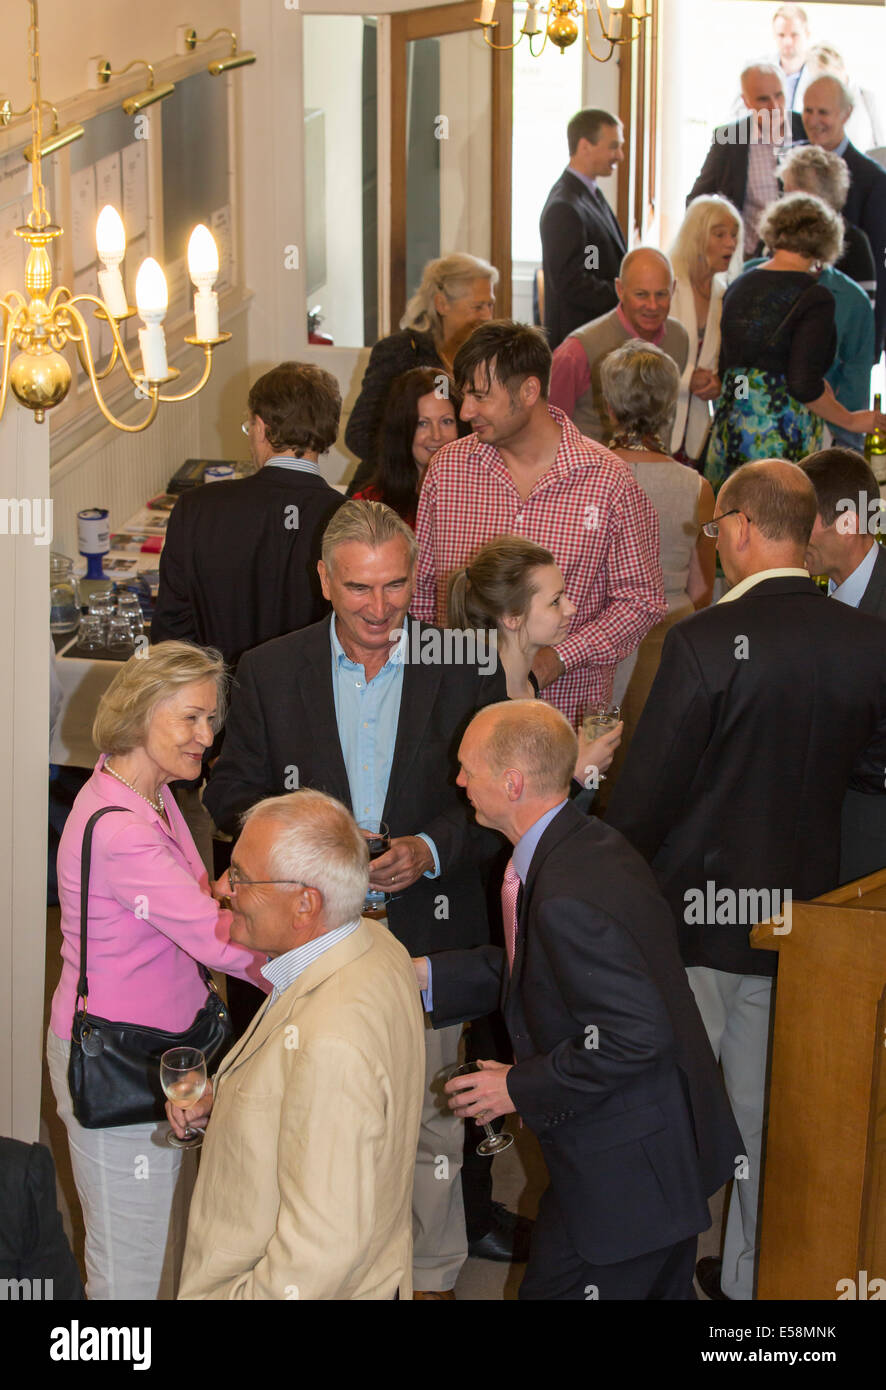 A Heaton Cooper artists event, sponsored by Rathbones at Brathay, 3rd July 2014. Stock Photo